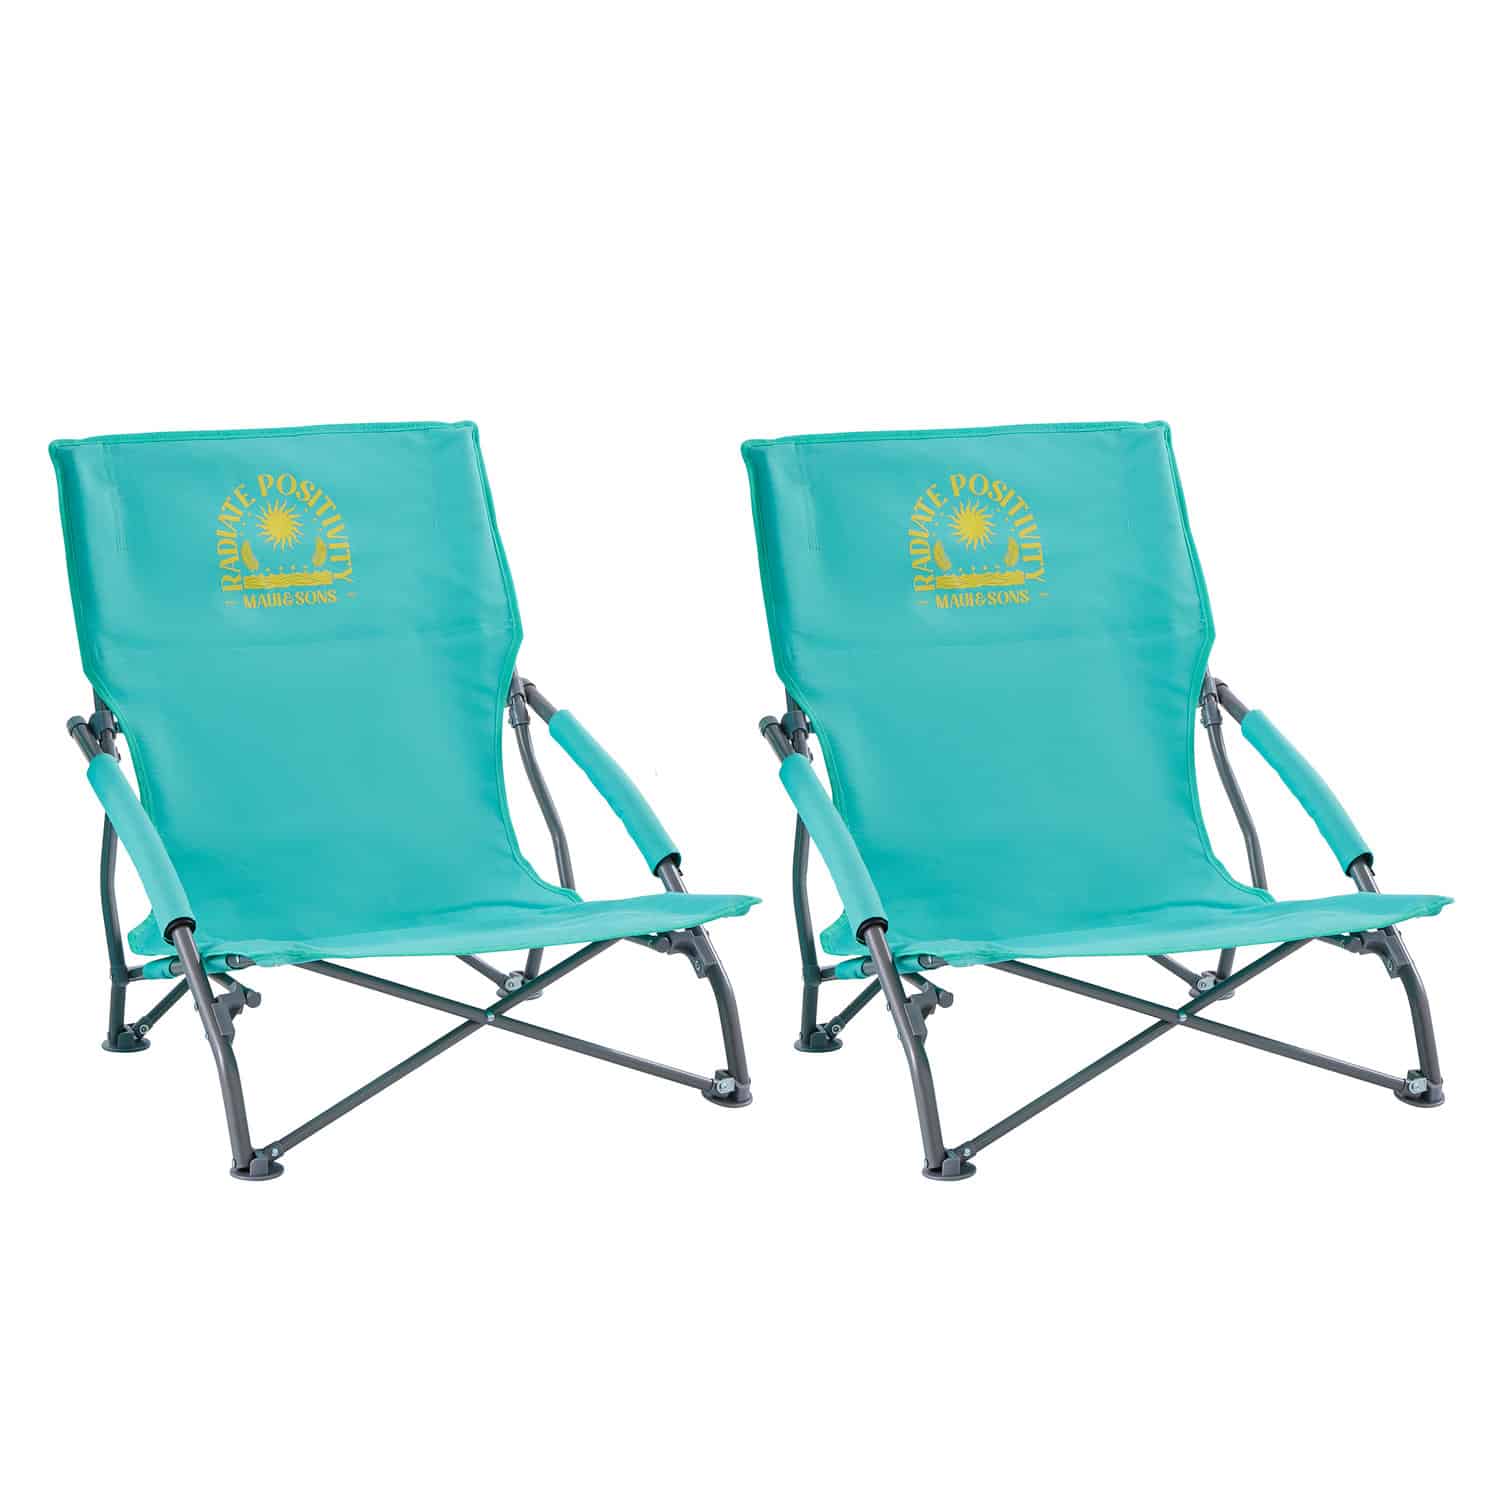 Sling Back Chair (Teal, 2 Pack)